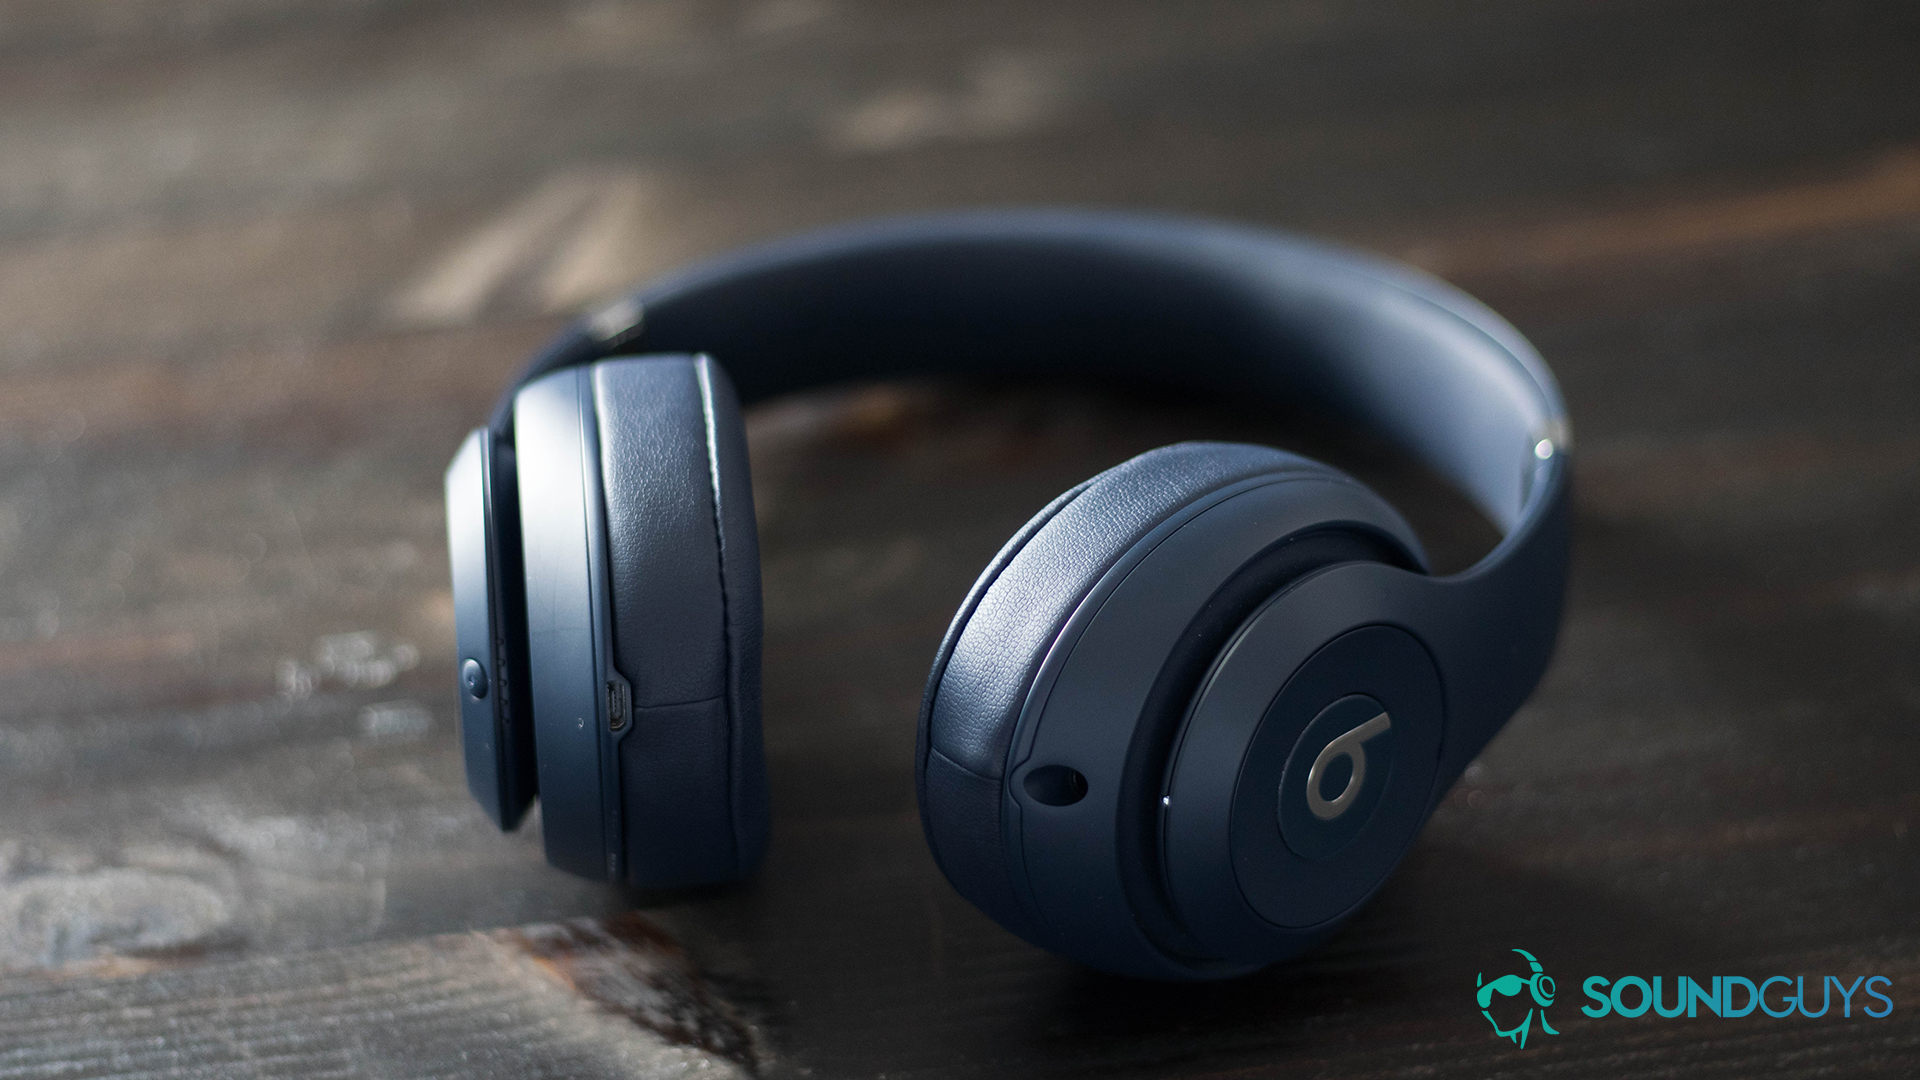 Even with a matte finish the Studio3 Wireless headphones don't pick up too many fingerprints.